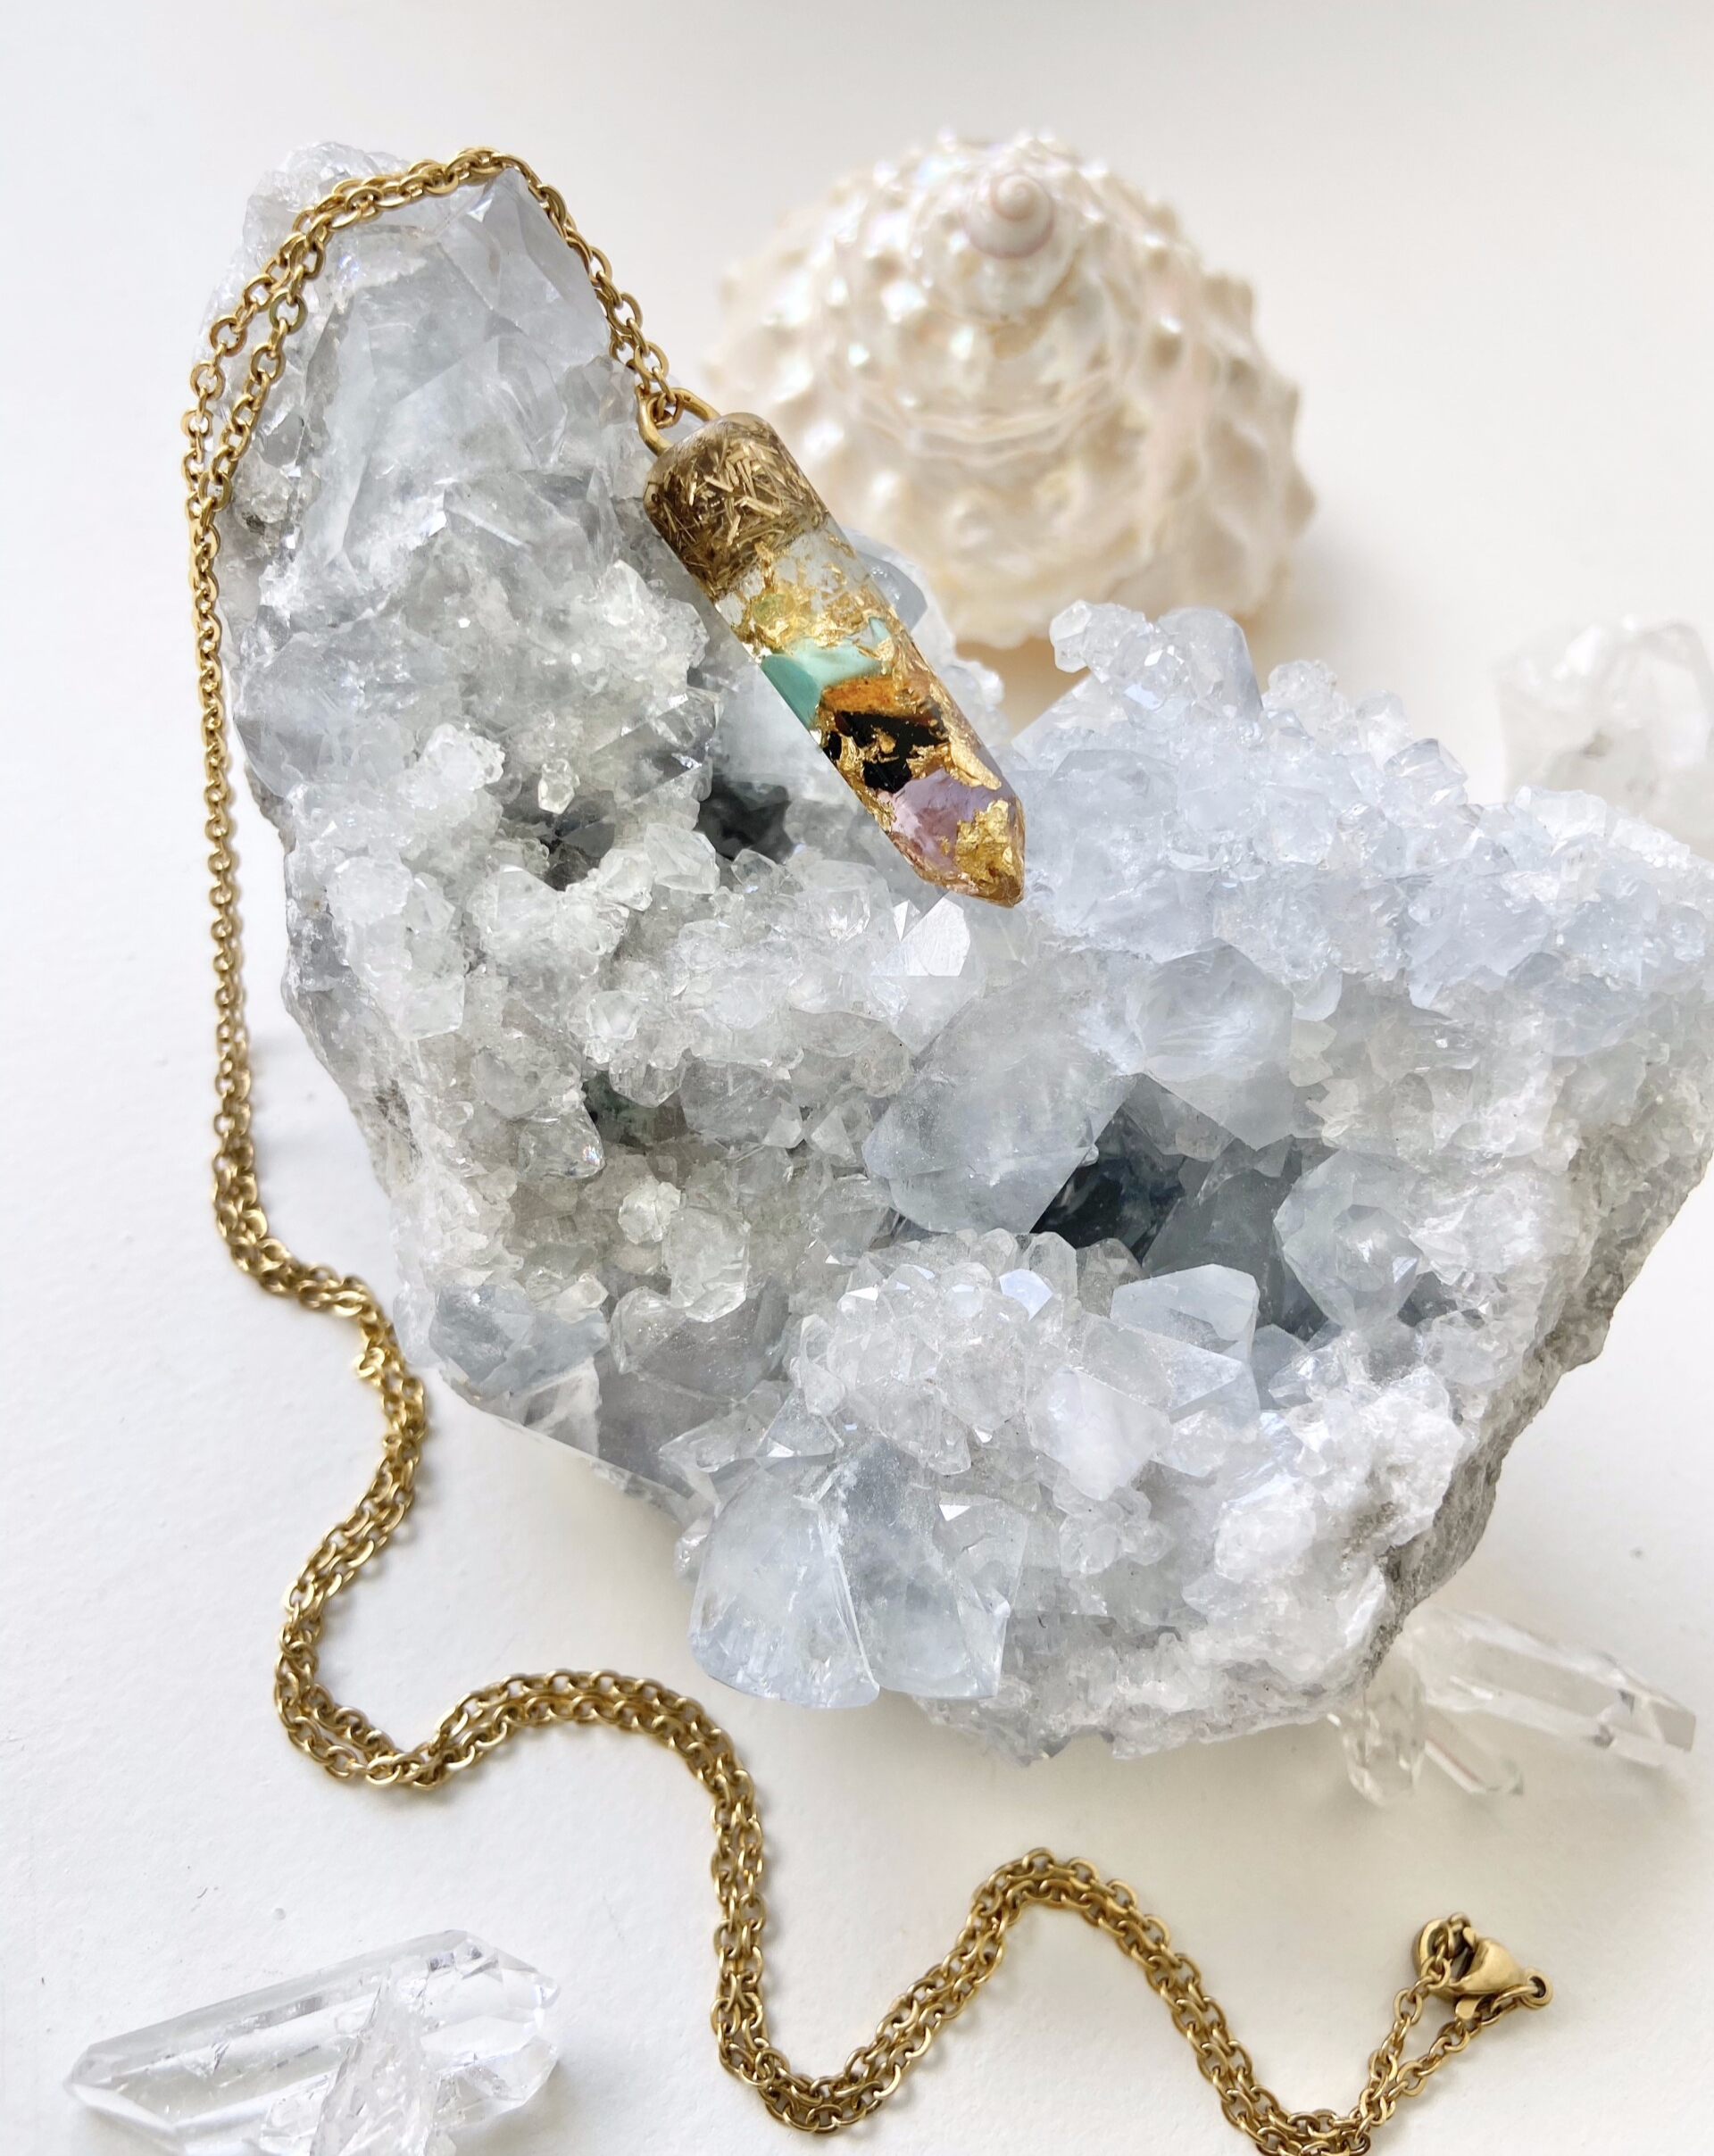 Star Seed Crystal Healing Pendant For Wisdom, Truth & Protection